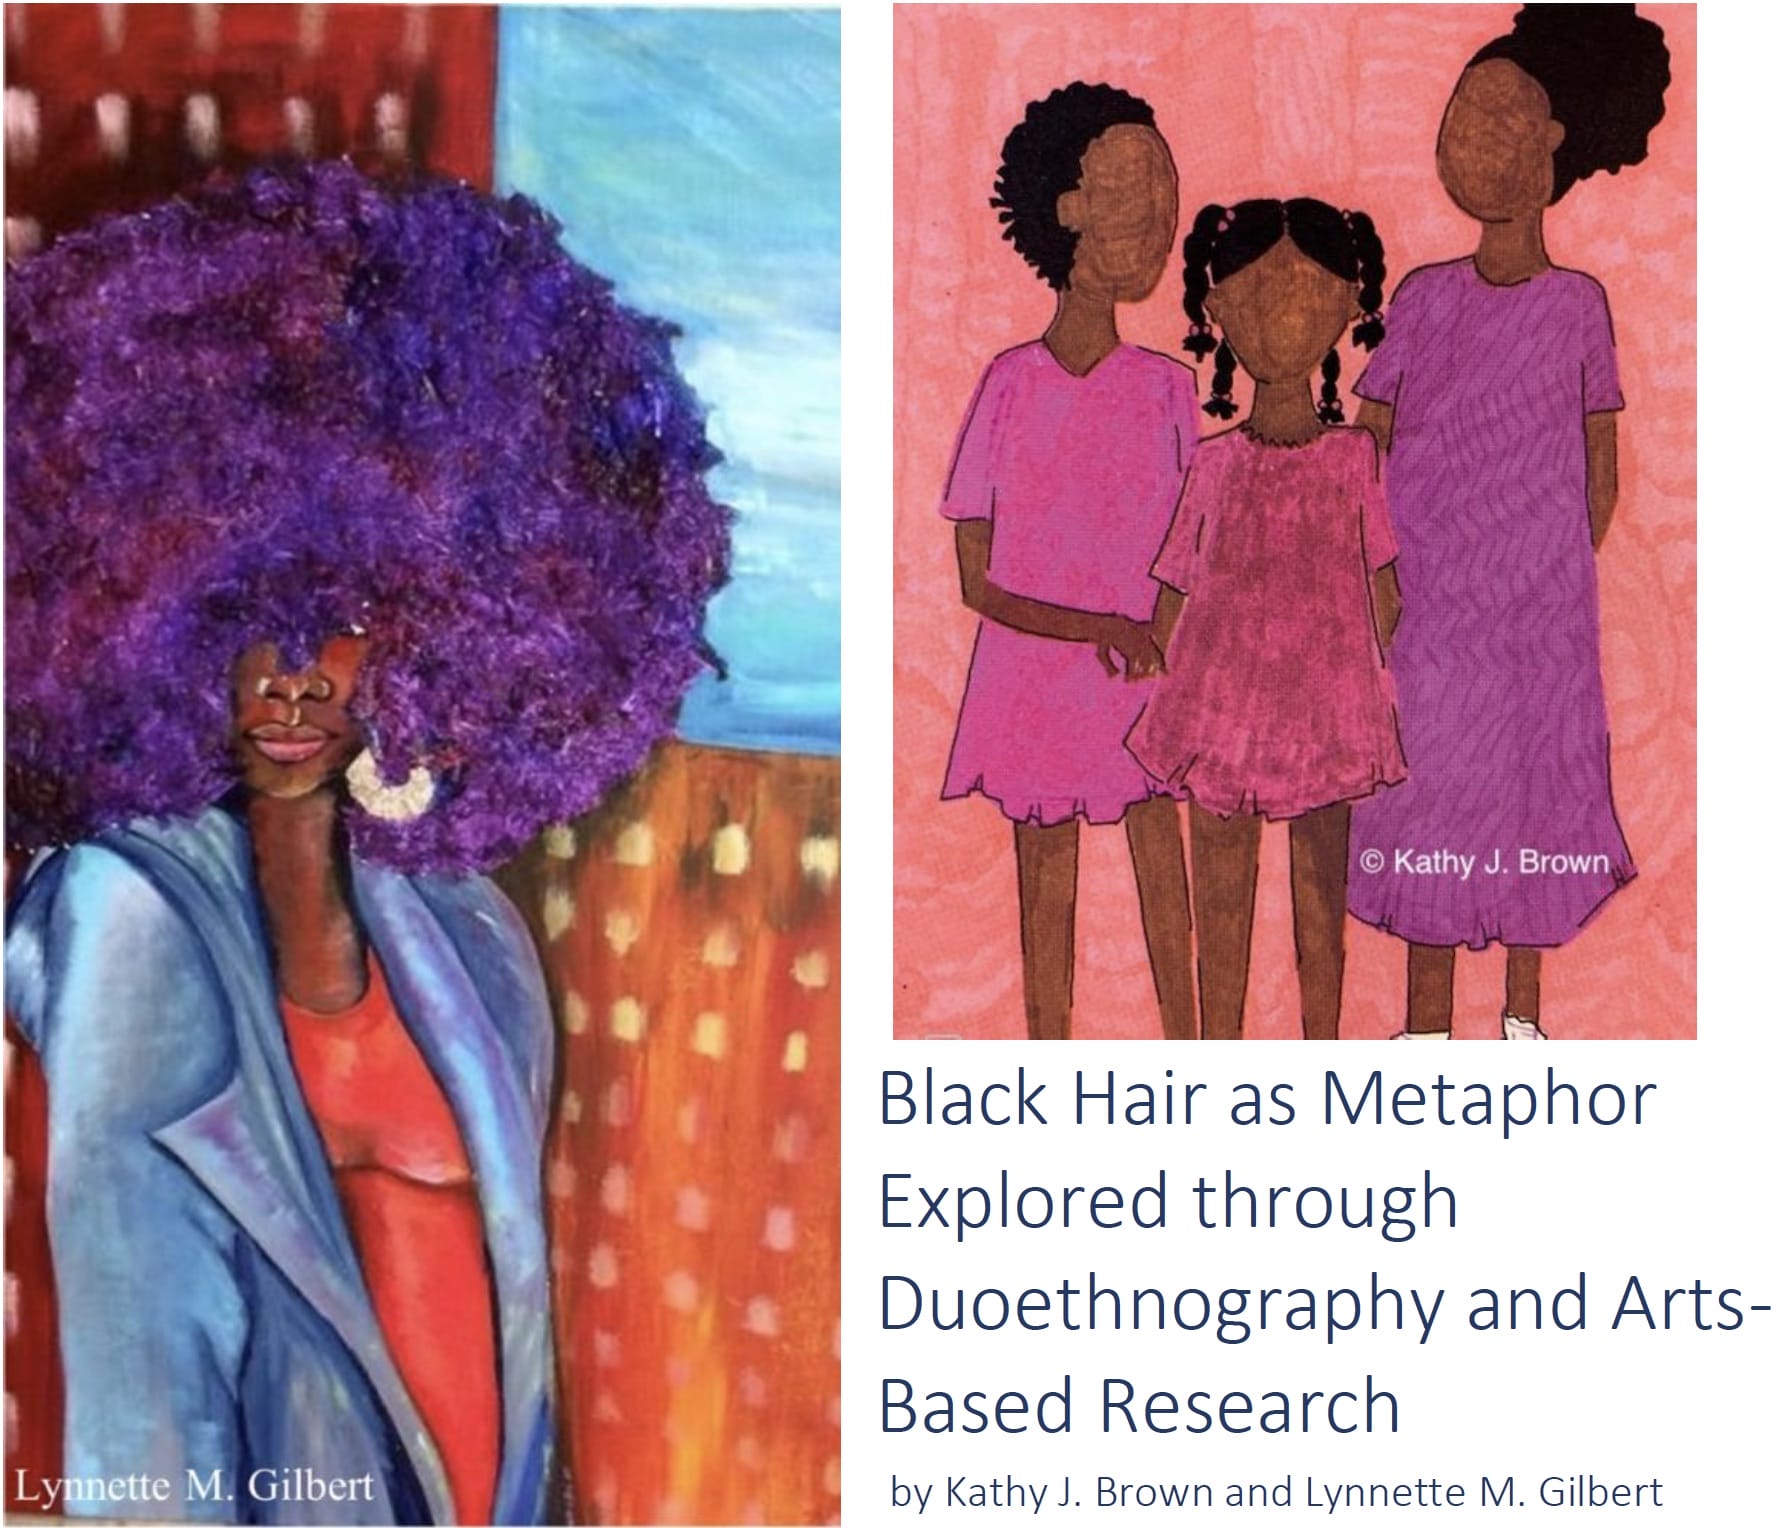 Black Hair as Metaphor Explored through Duoethnography and Arts-Based Research